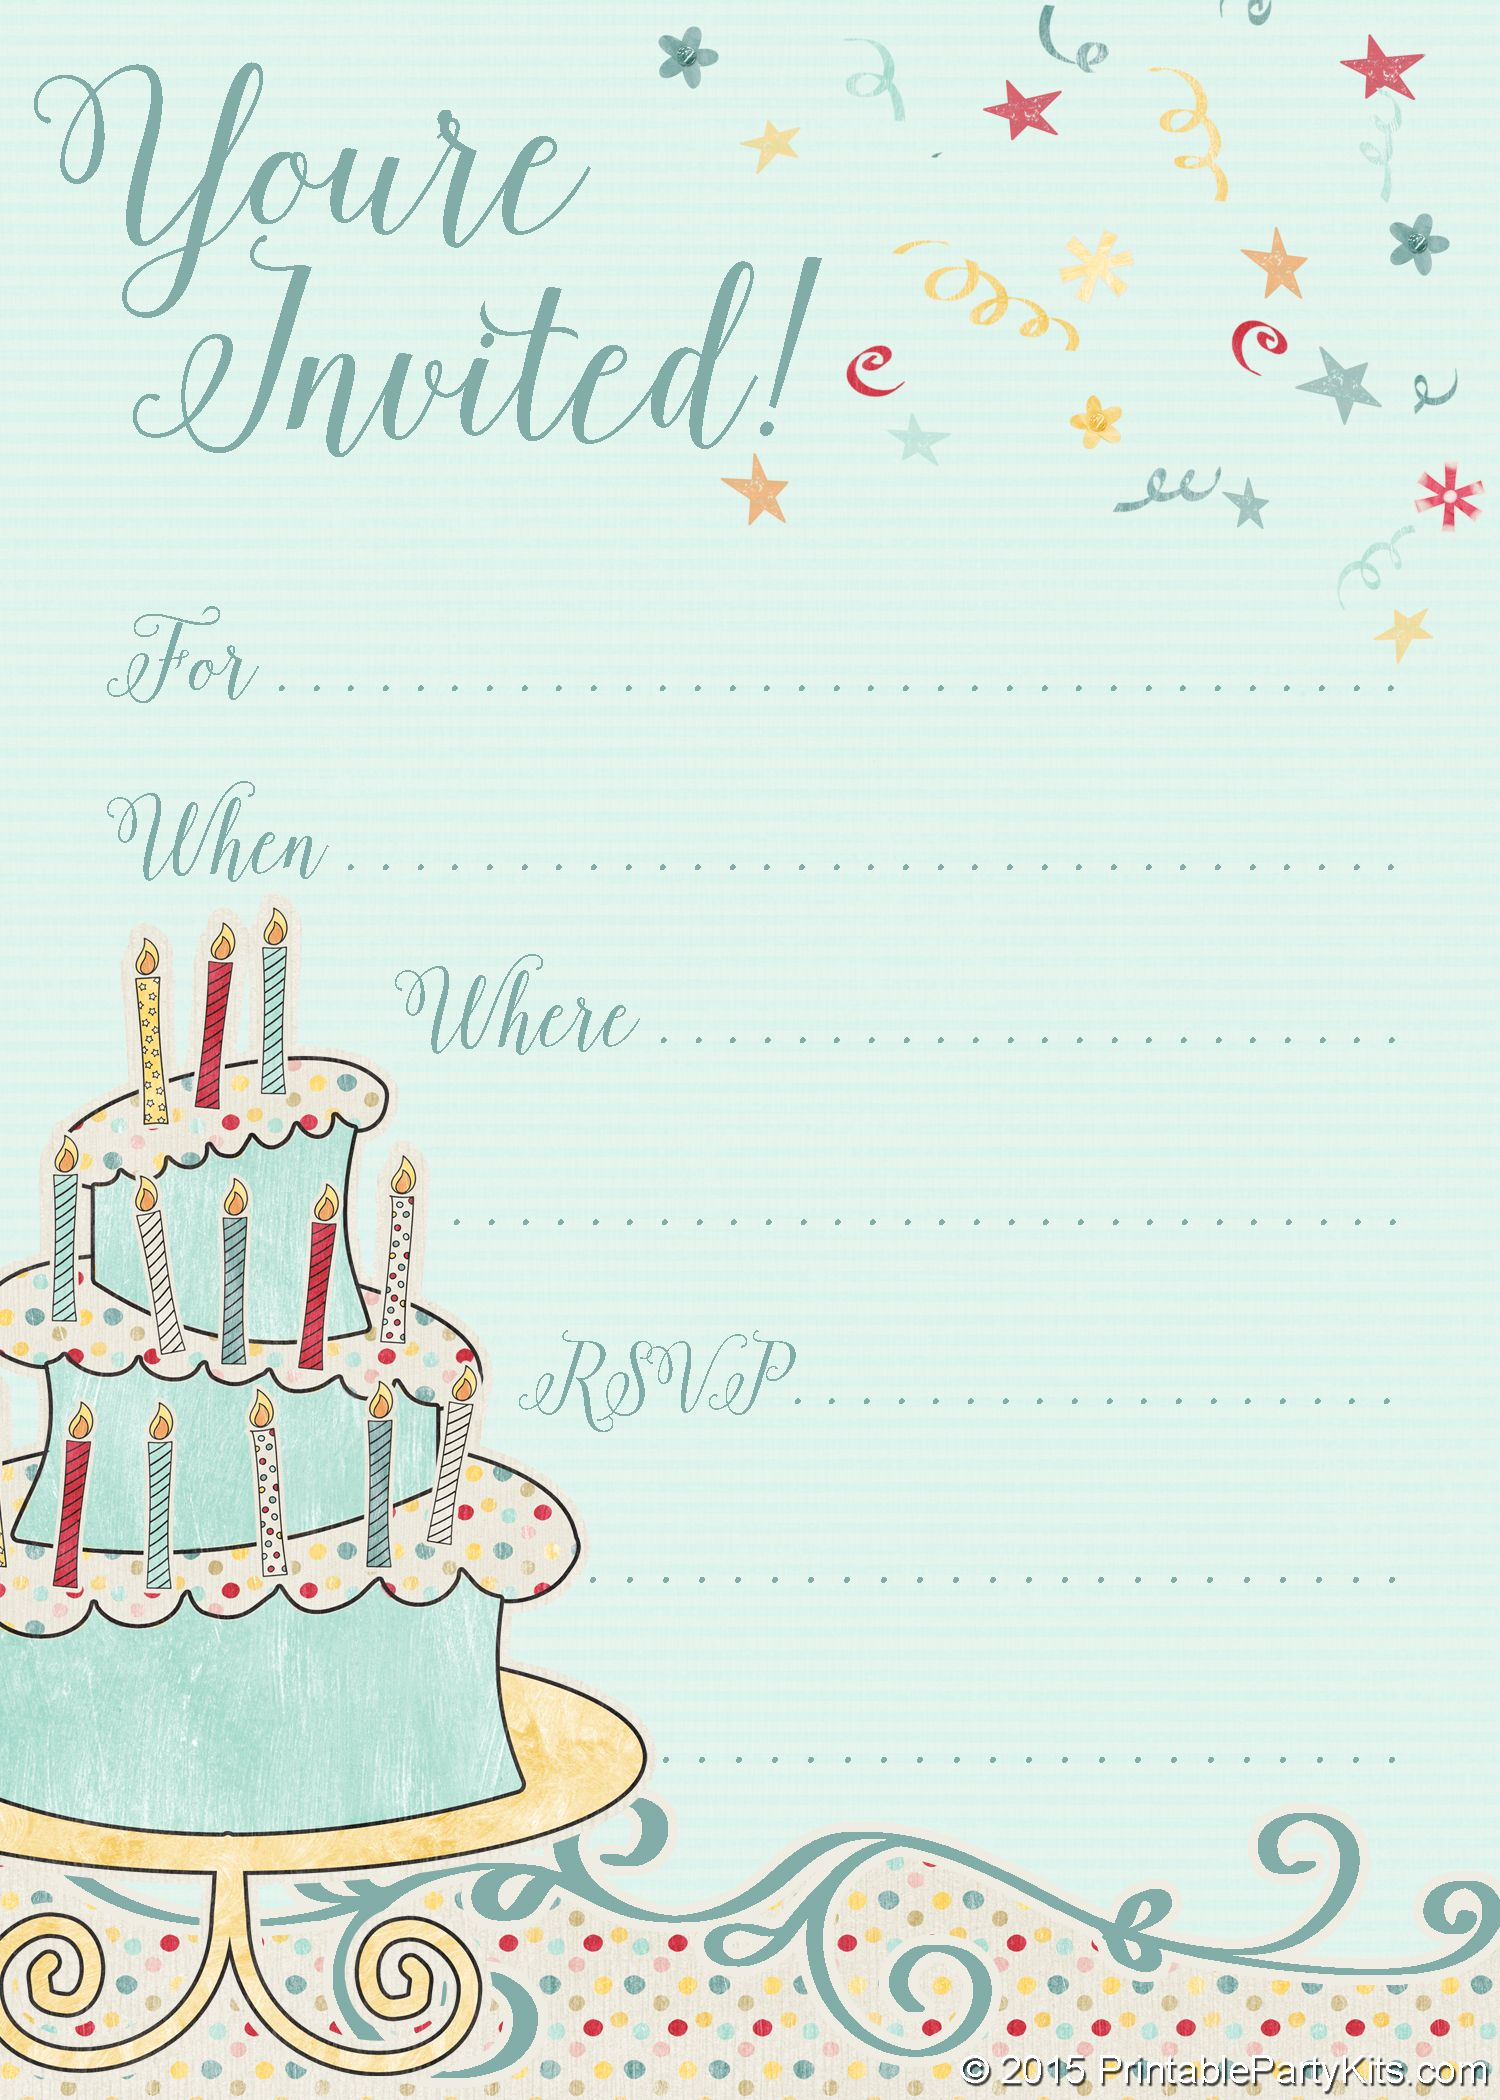 Free Printable Whimsical Birthday Party Invitation Template Party inside sizing 1500 X 2100